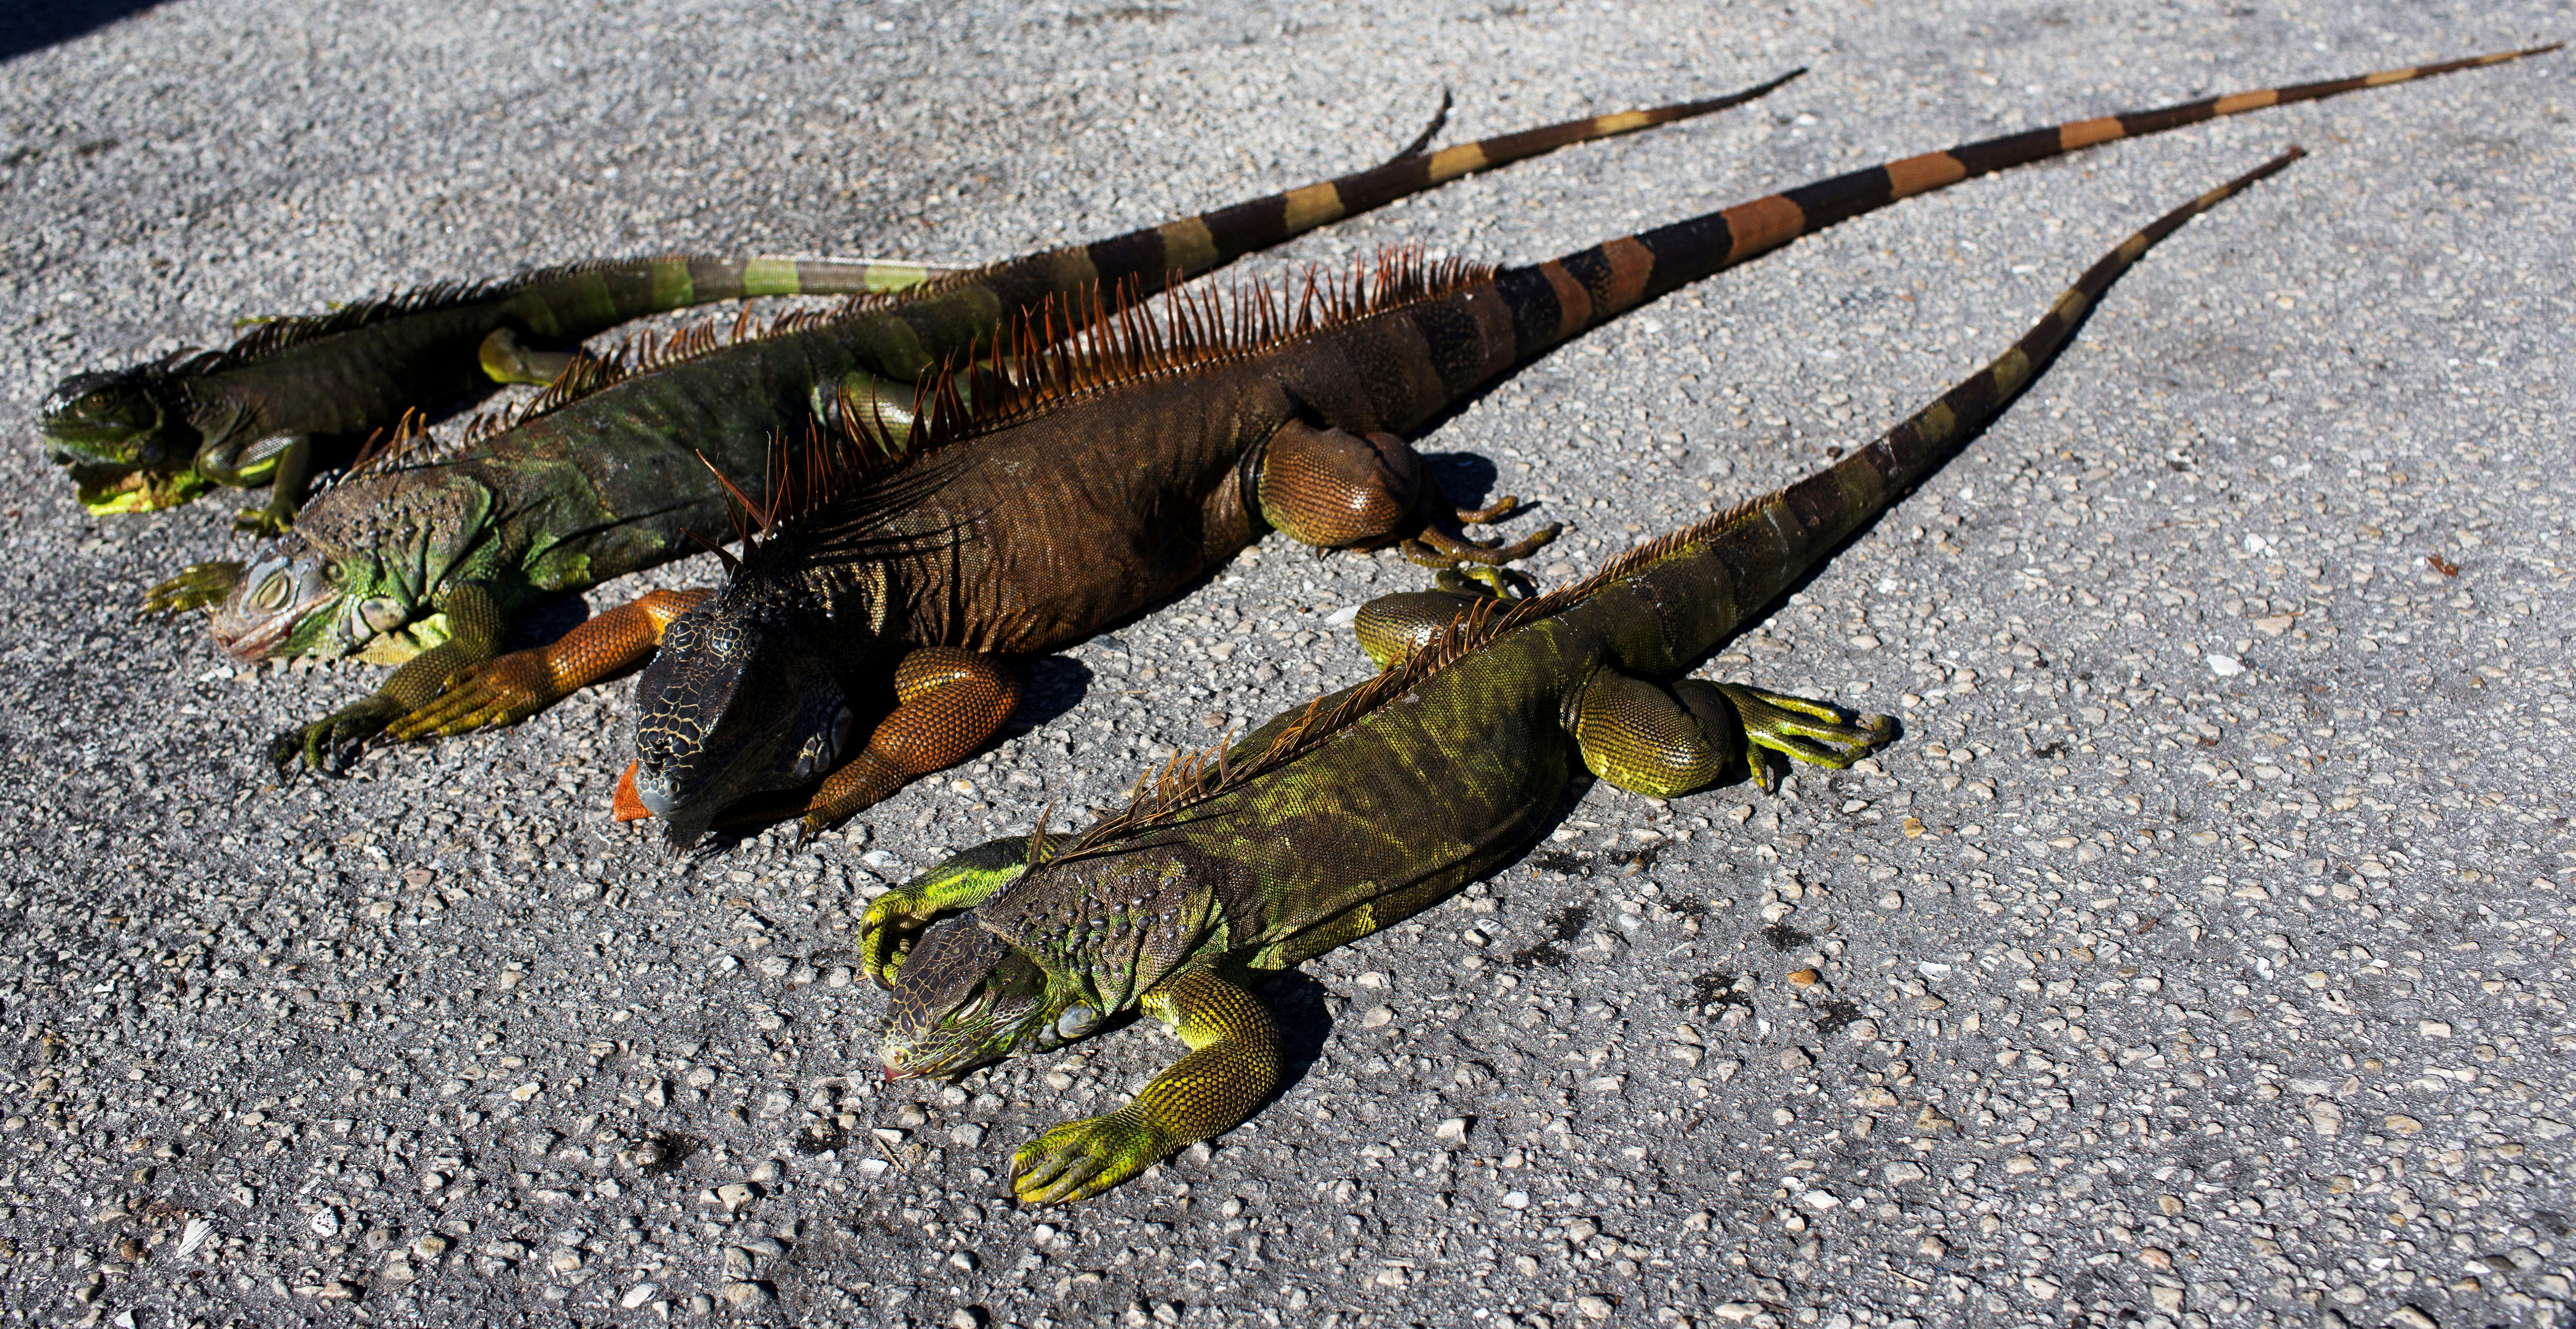 Cold-stunned iguanas are seen following extreme cold weather in Lake Worth